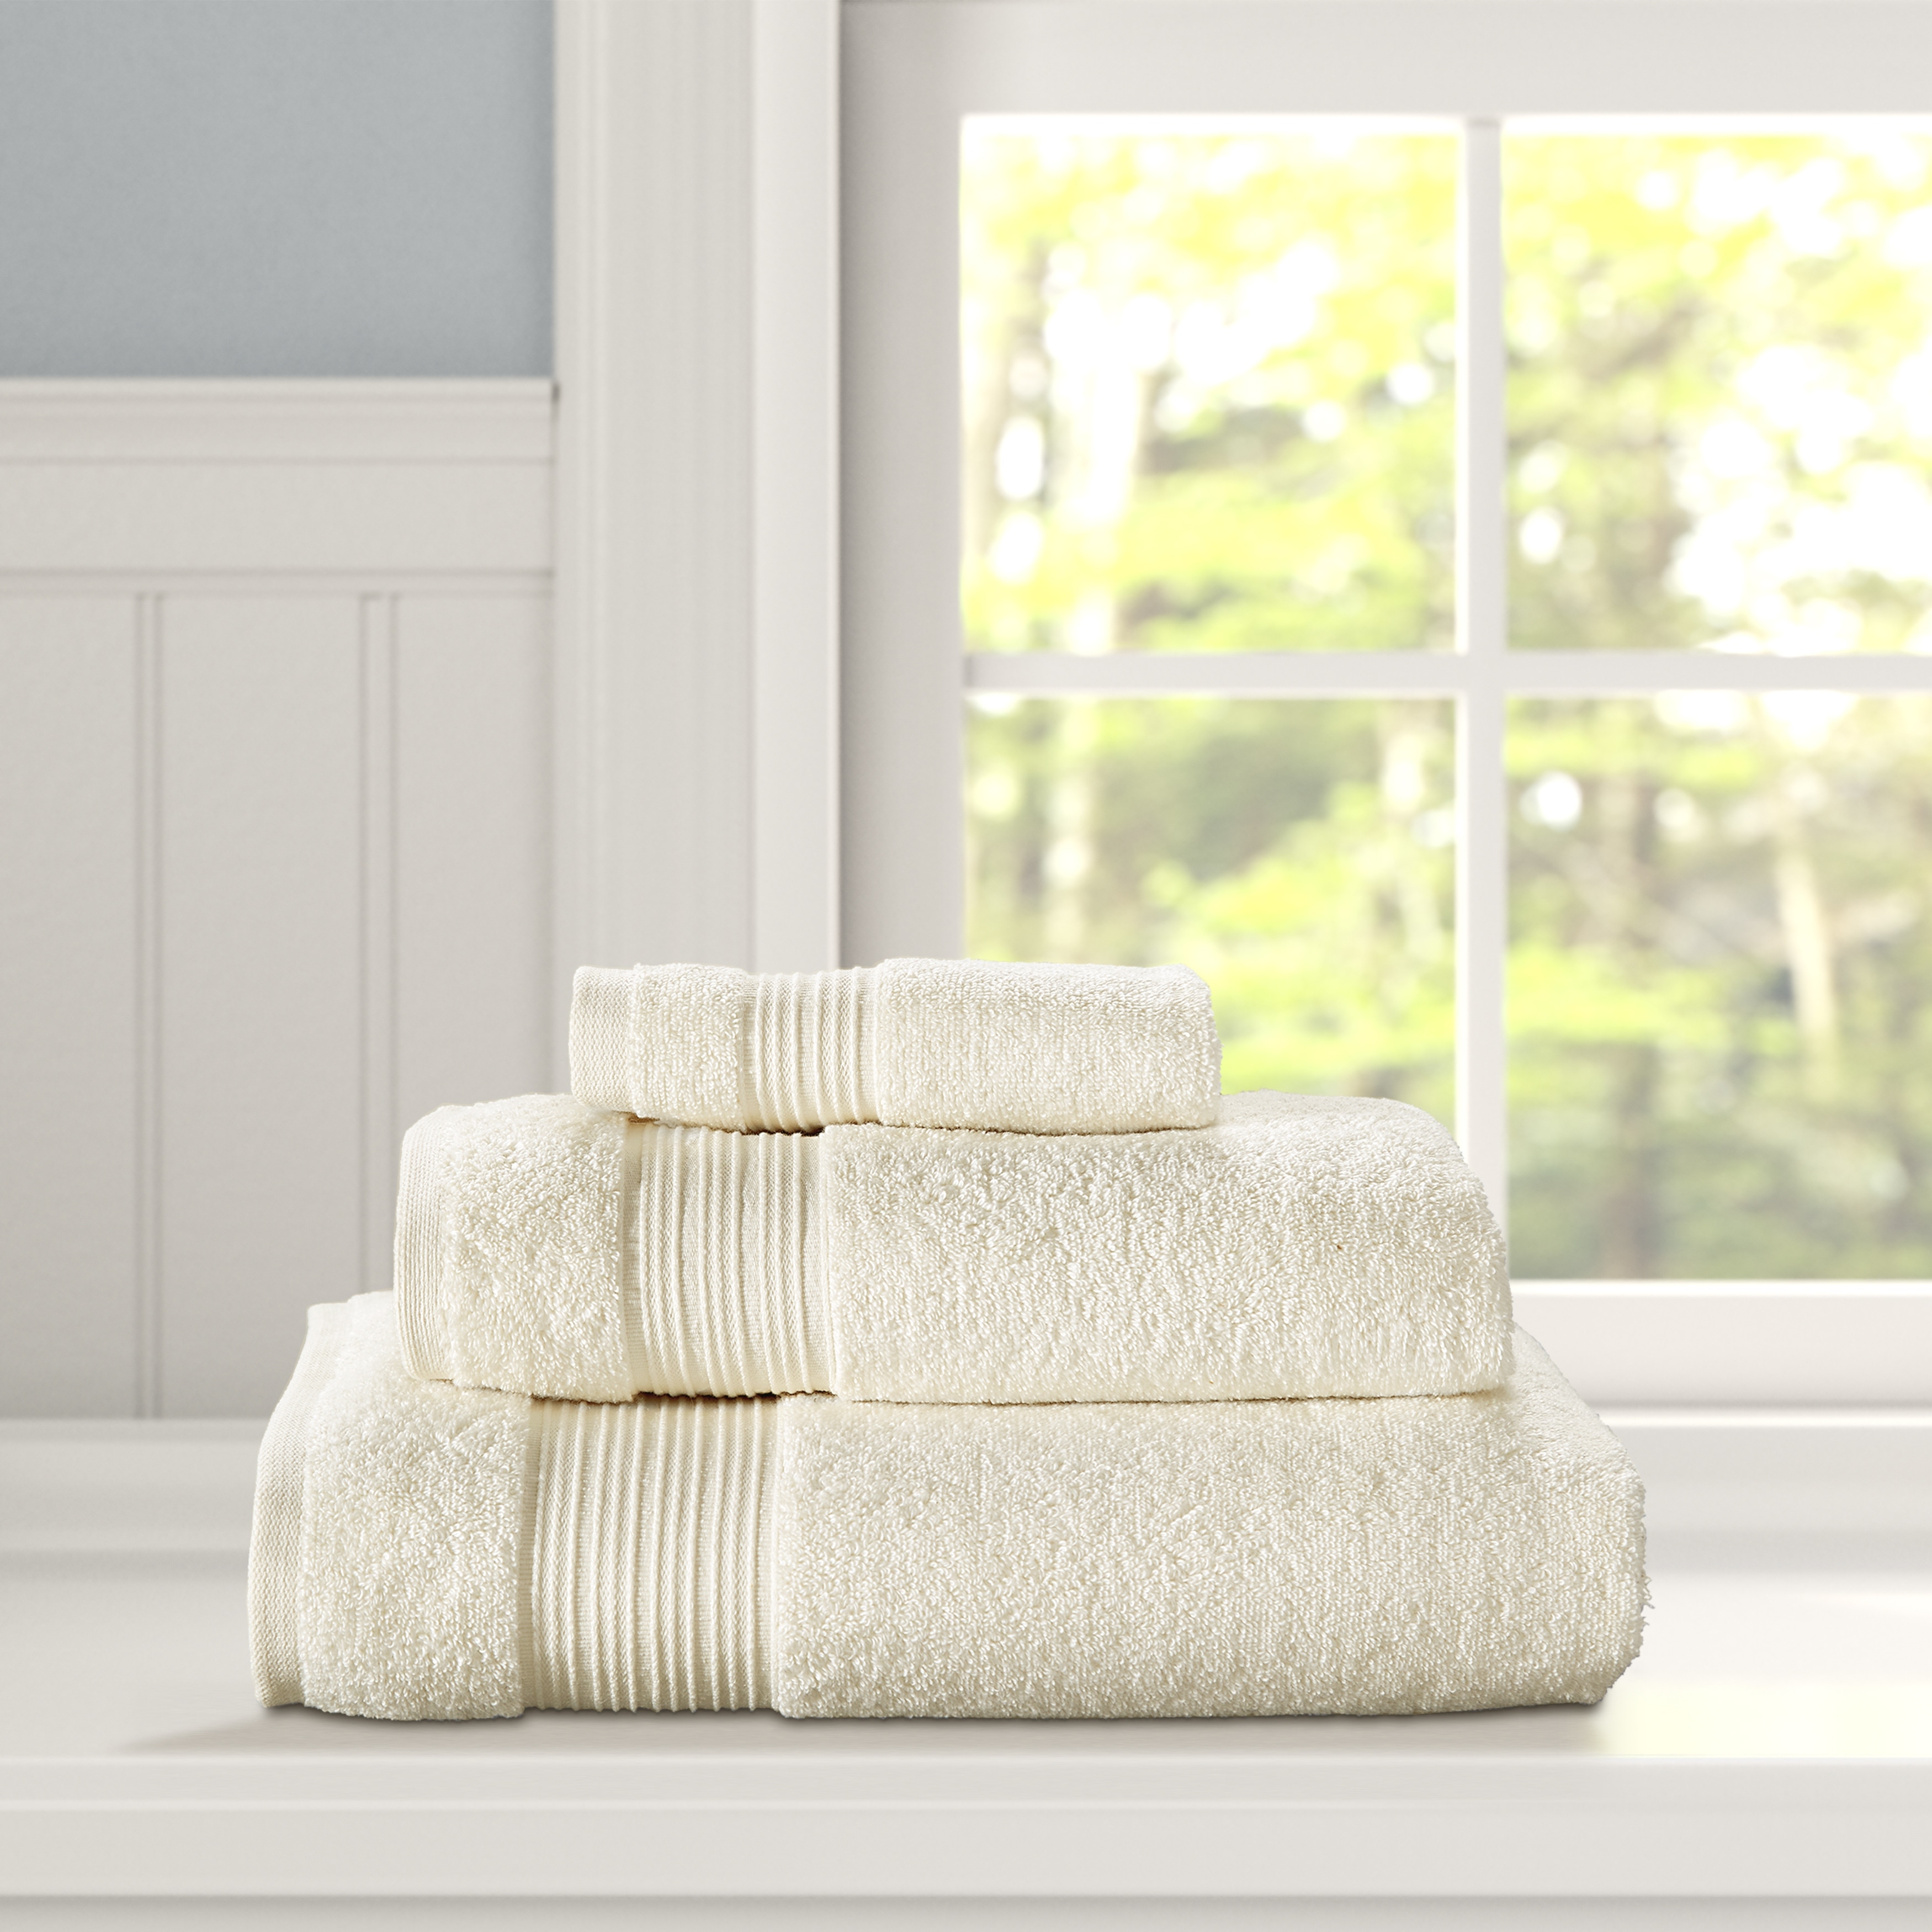 https://ak1.ostkcdn.com/images/products/is/images/direct/5e3847cc60e1fe2c4352b87844edf7616a59f058/Five-Queens-Court-Soma-2-Piece-Turkish-Towel-Set.jpg